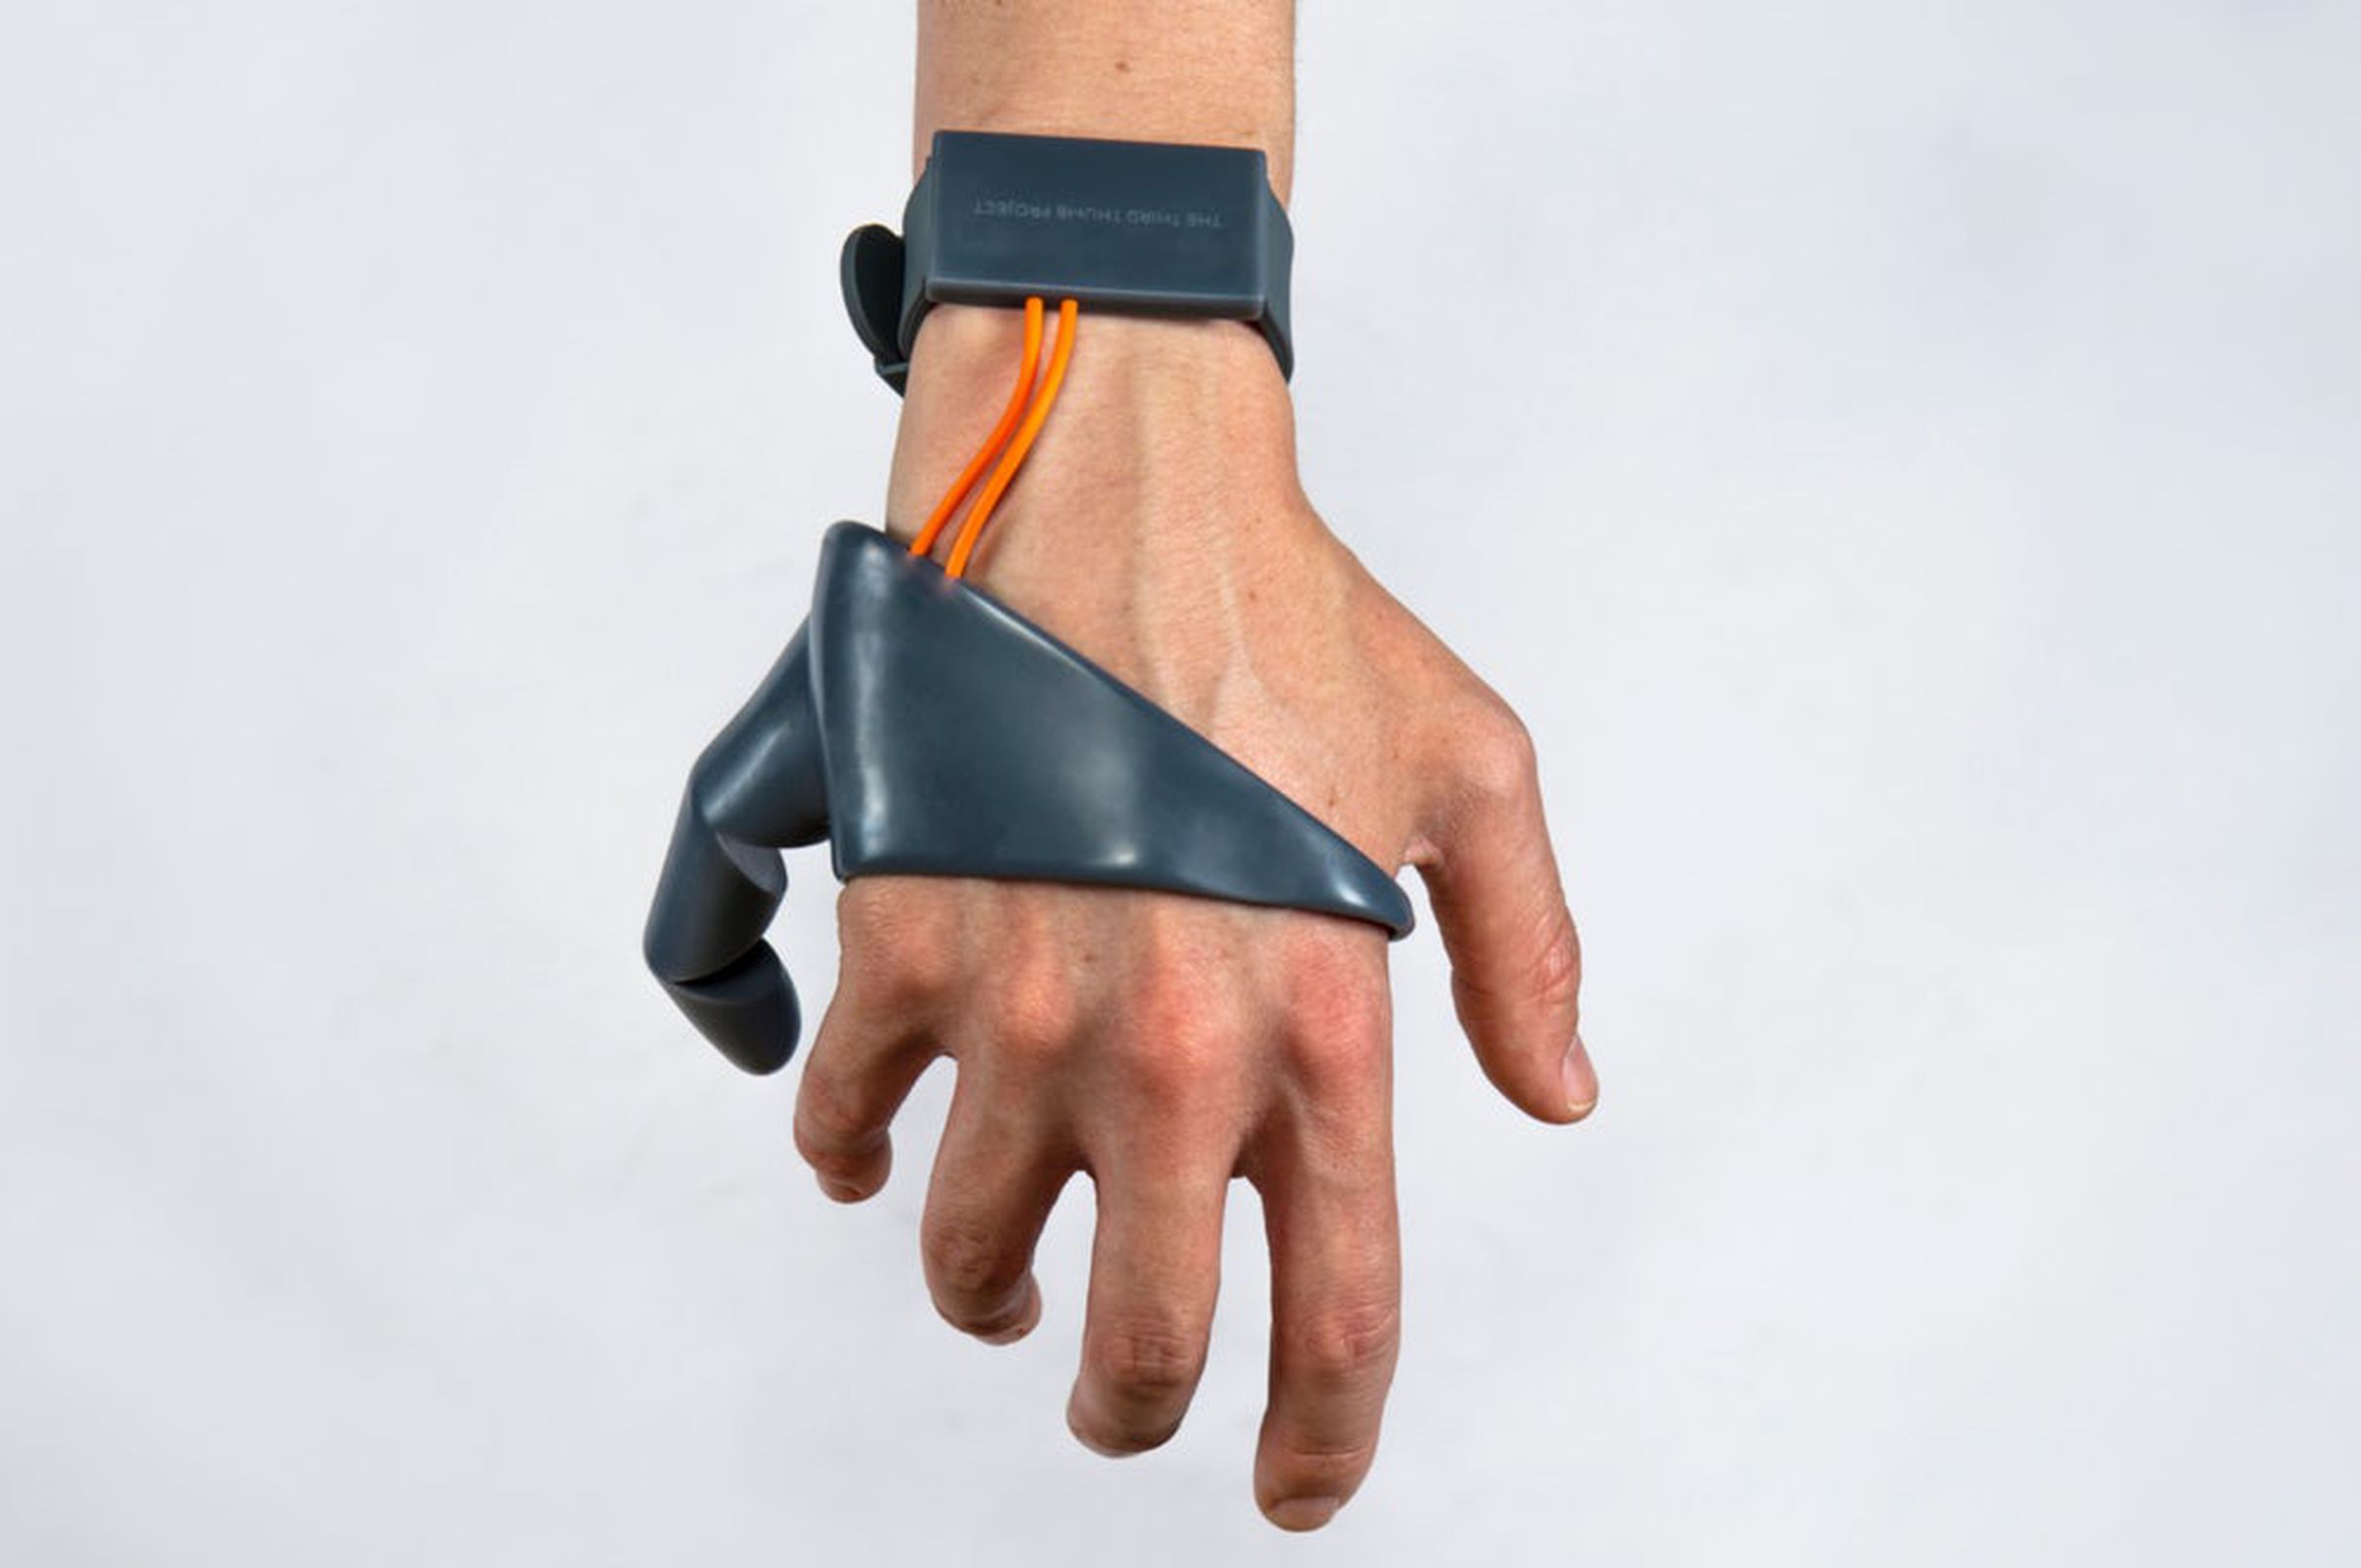 The thumb’s creator wants to make us reimagine what we think prosthetics are for.